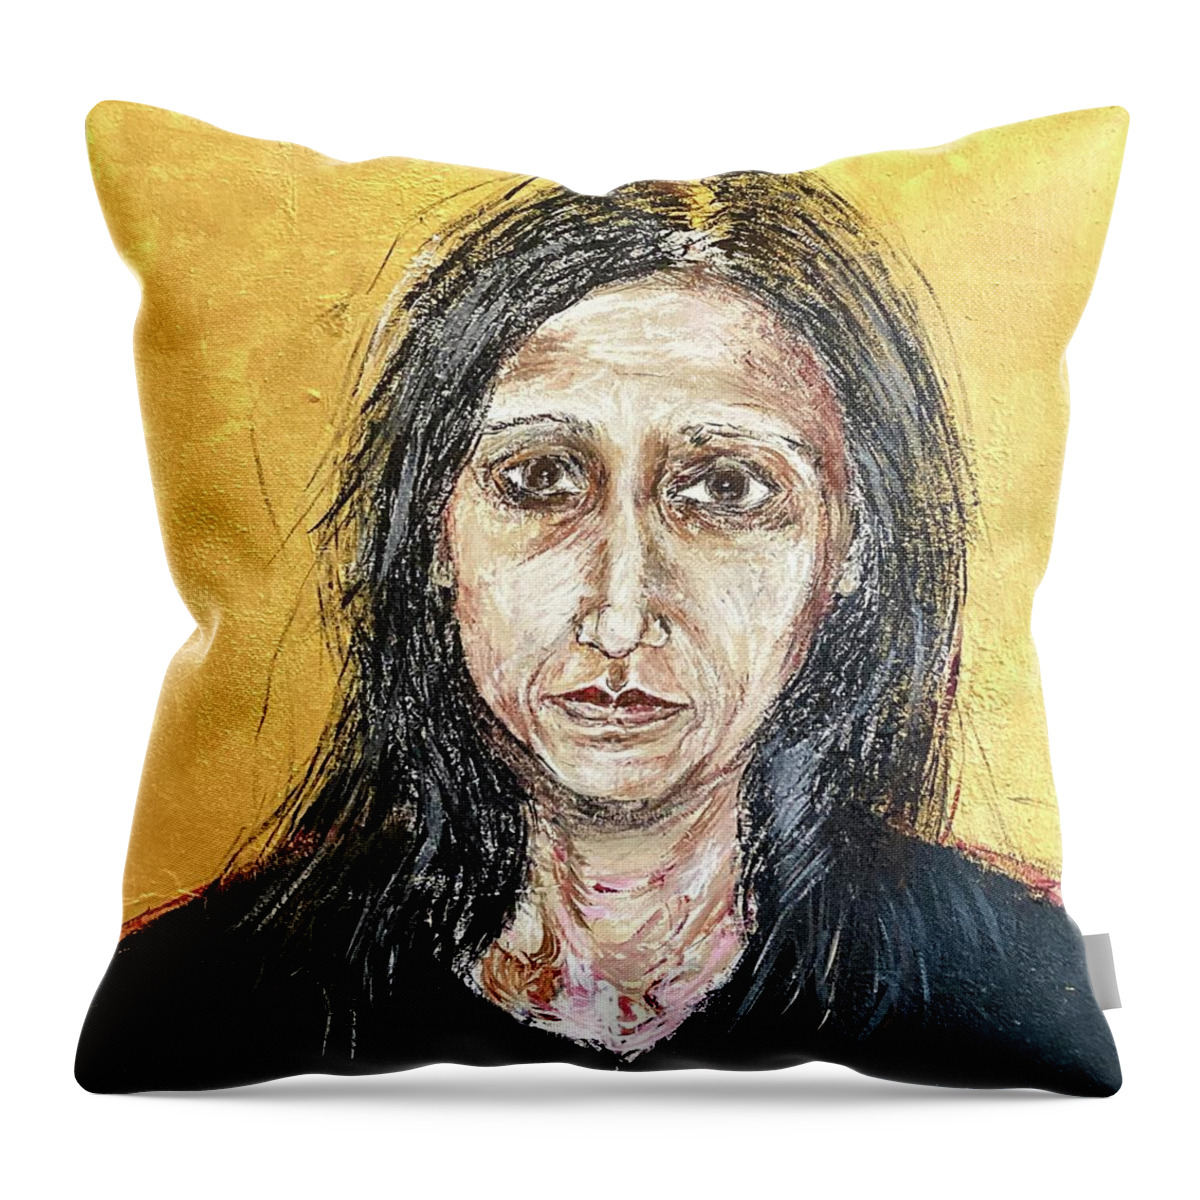 Portrait Throw Pillow featuring the painting Worried by David Euler